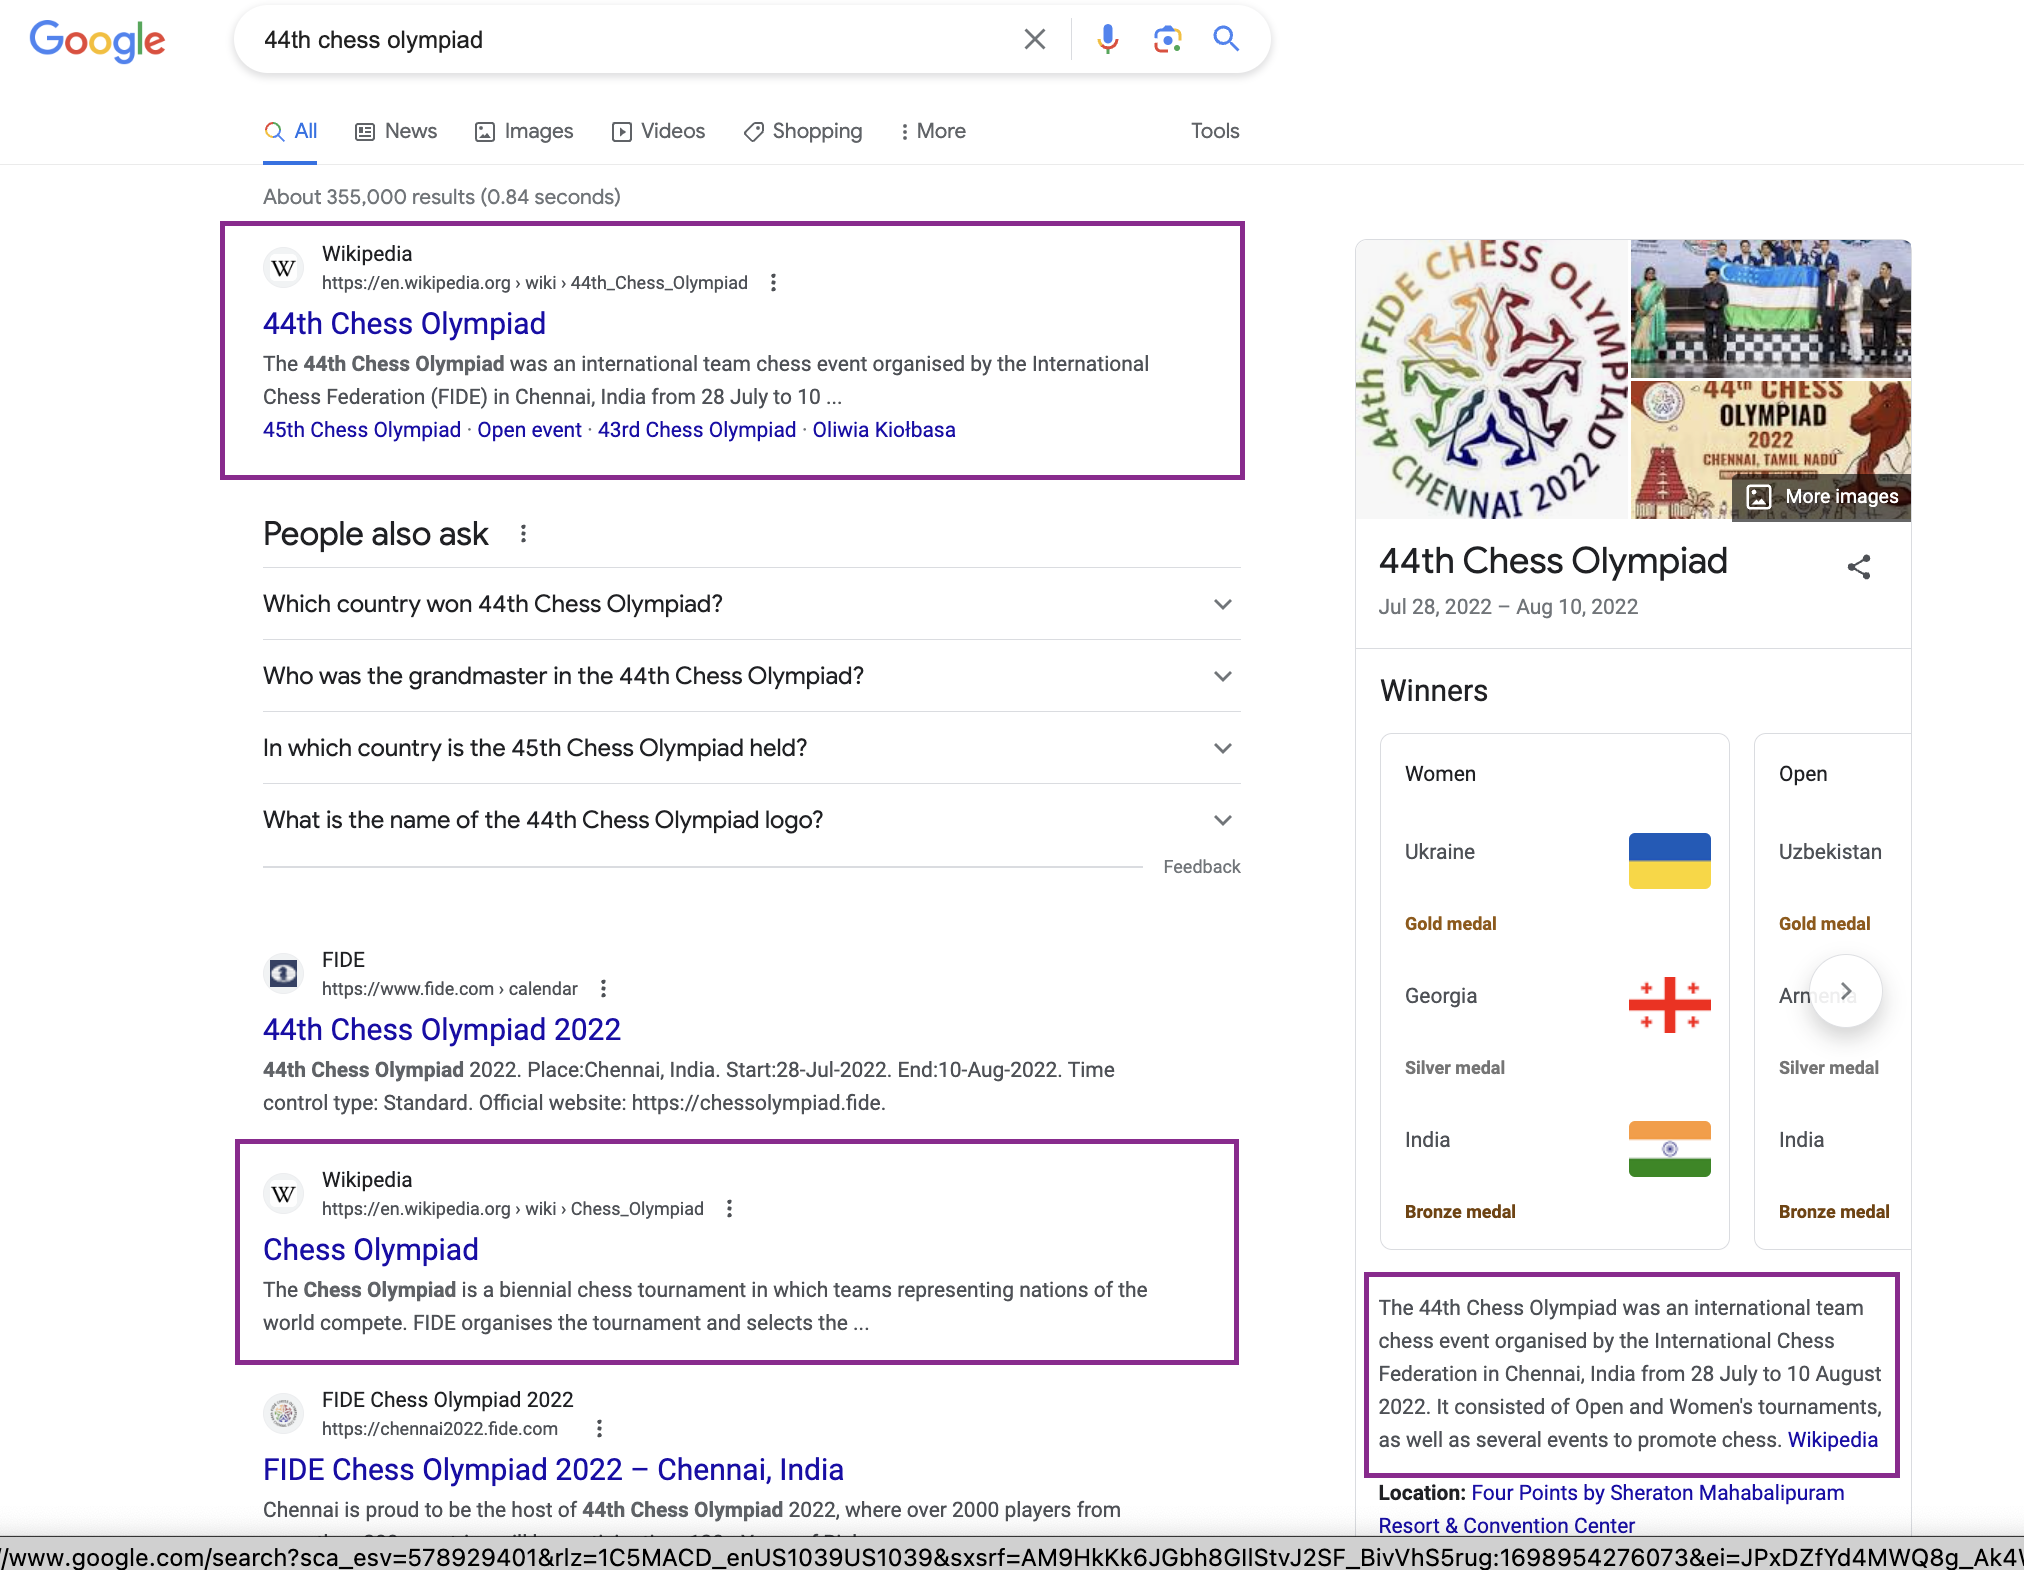 Wikipedia shows up multiple times in a search results page.